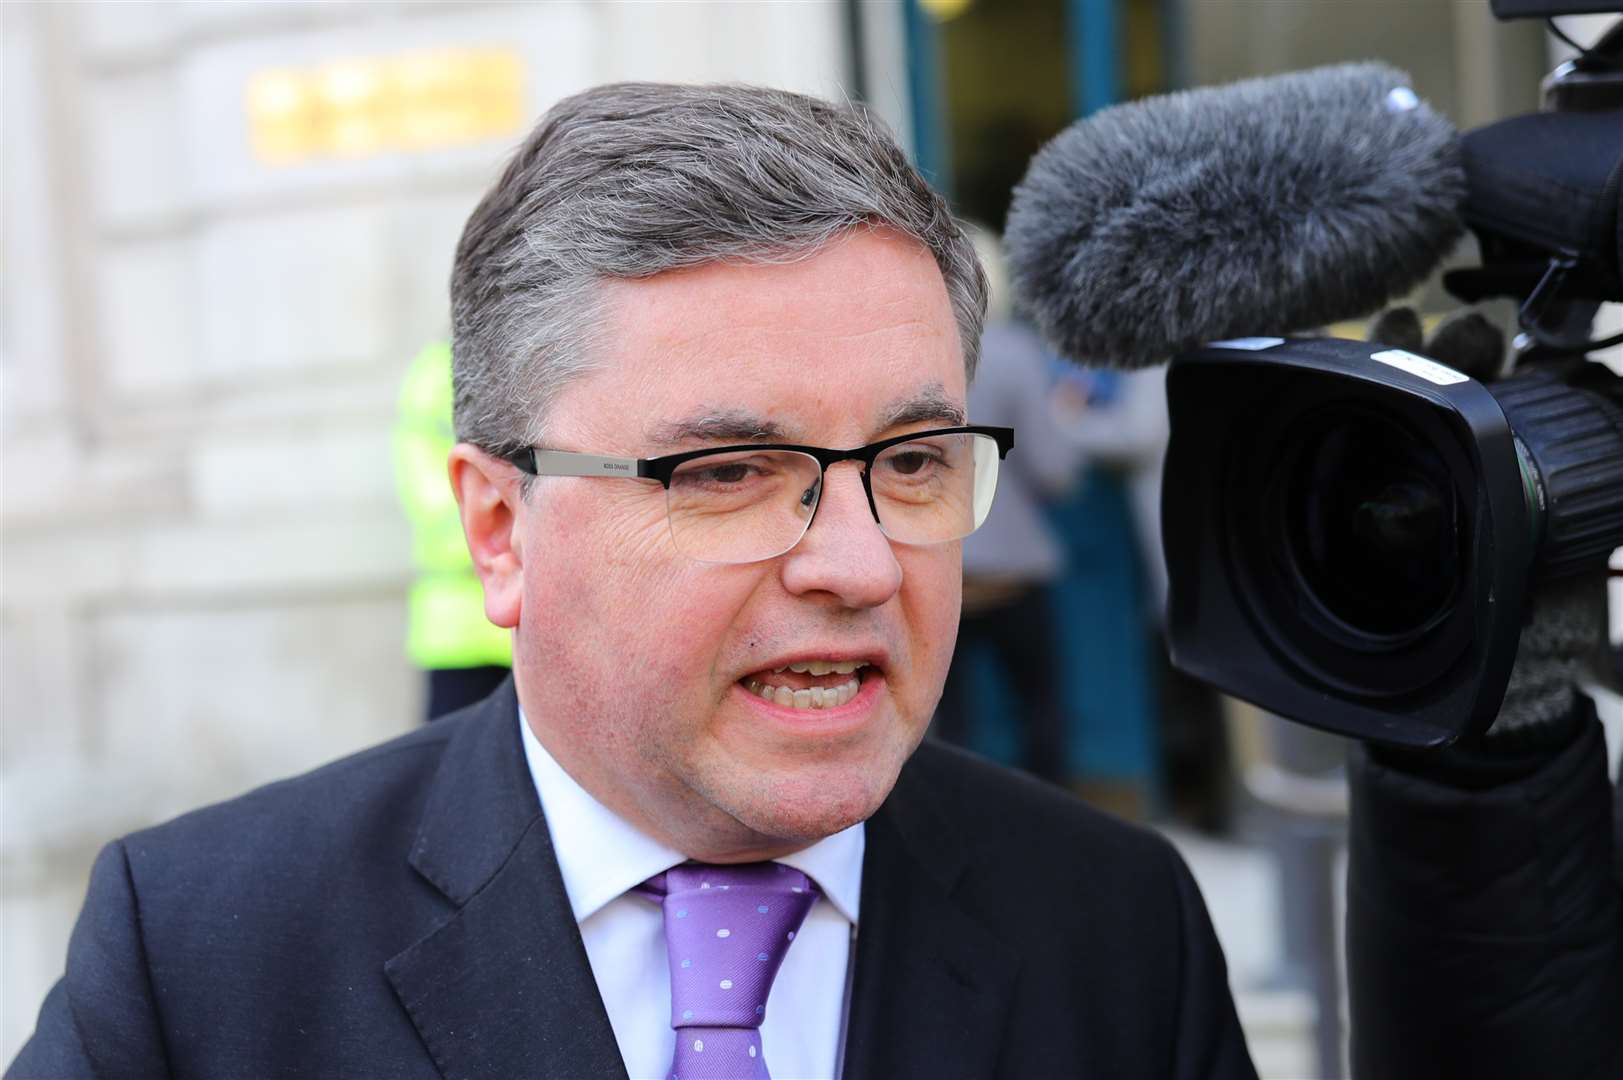 Justice Secretary Robert Buckland said all prisoners will face a tough risk assessment and must comply with strict conditions (Aaron Chown/PA)